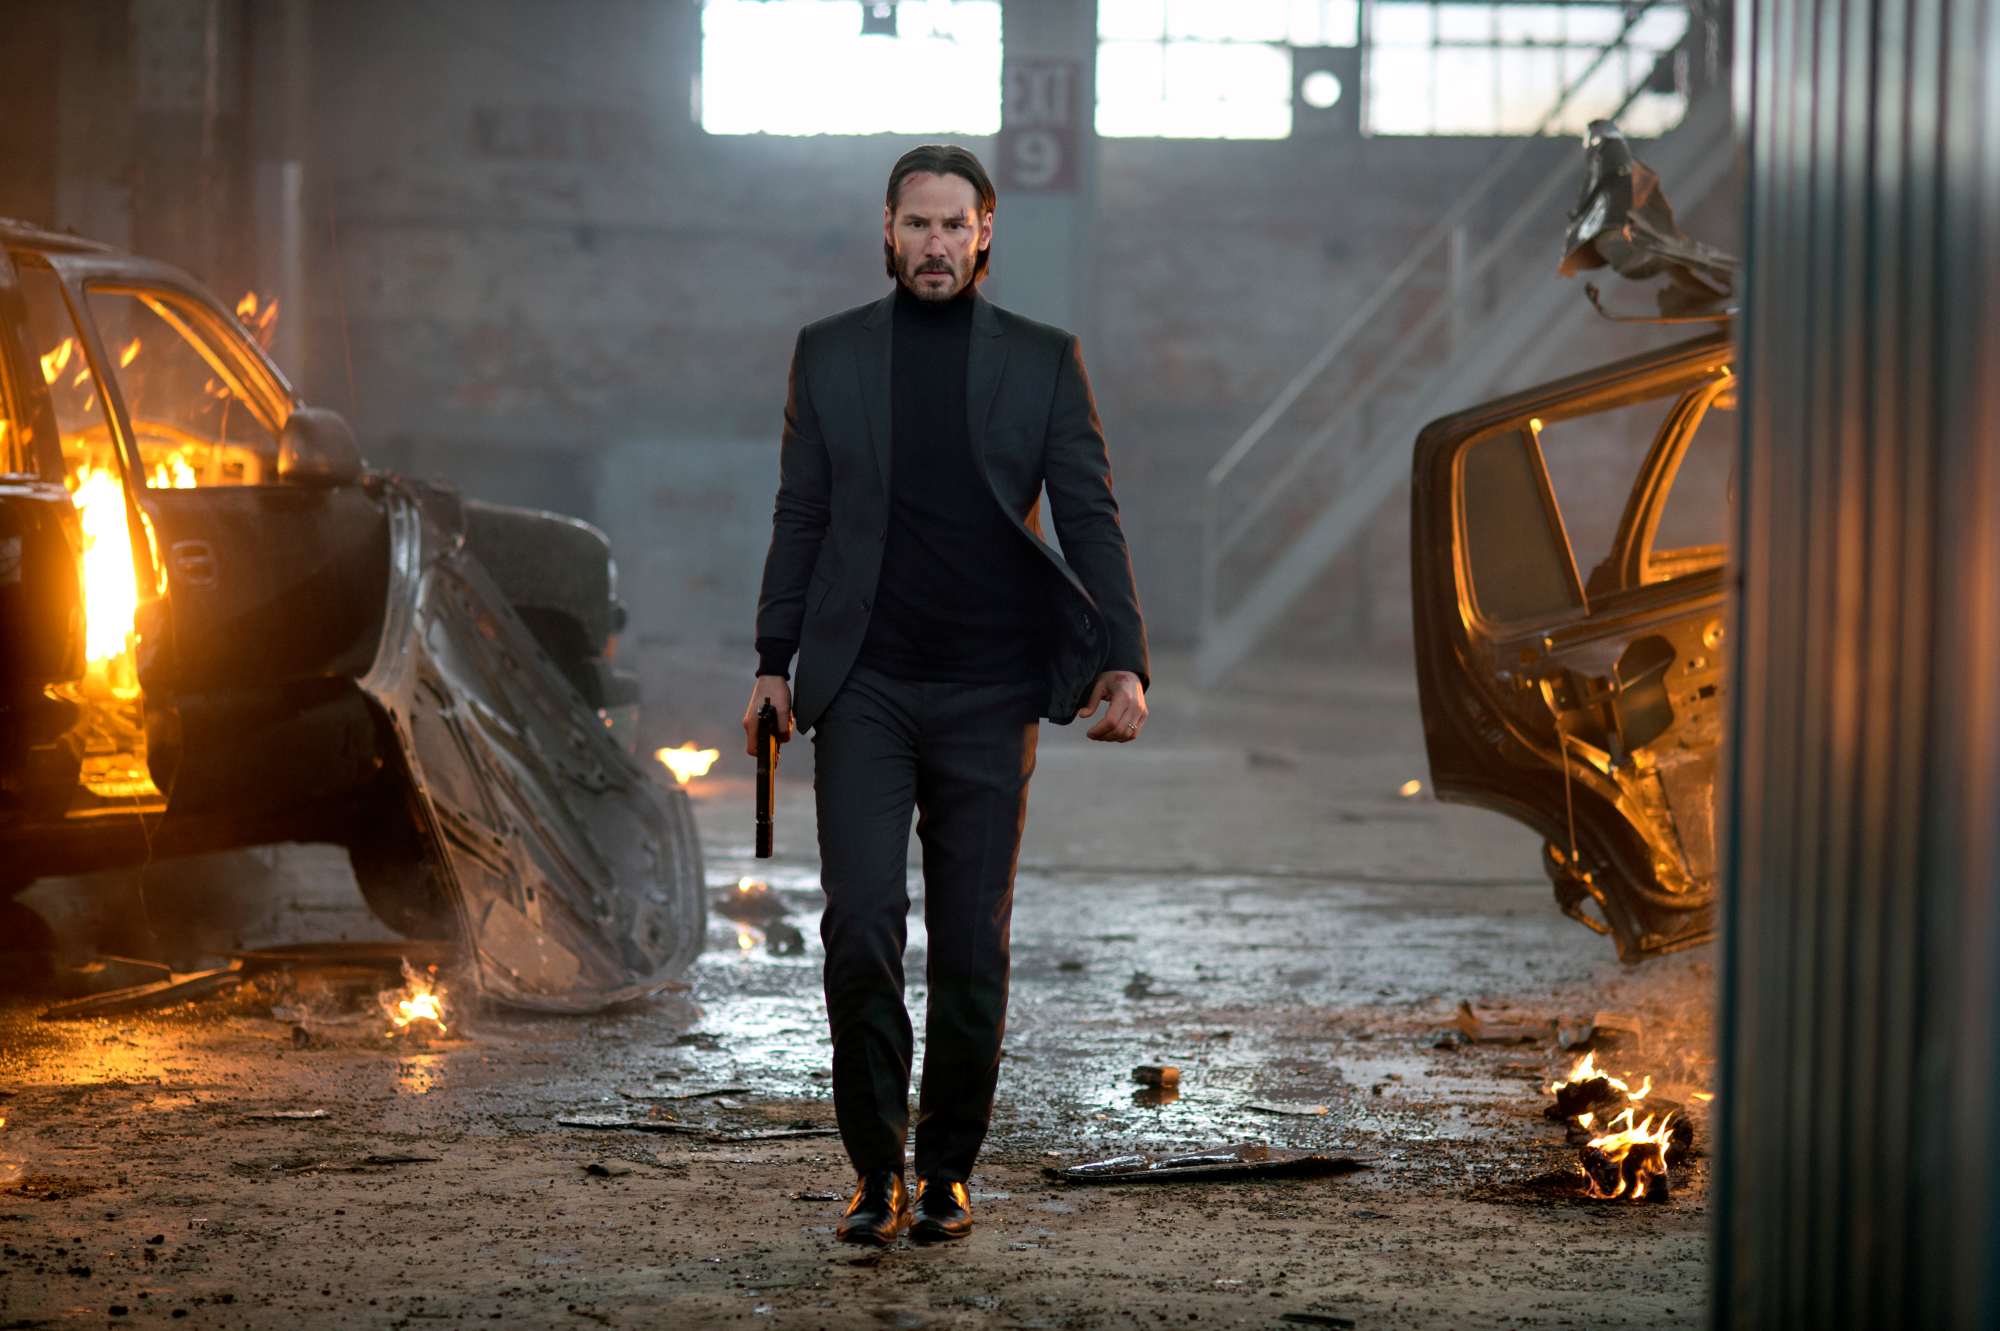 'John Wick' Keanu Reeves as John Wick walking down a path of destruction with fire around him, while he's wearing a suit and holding a gun.